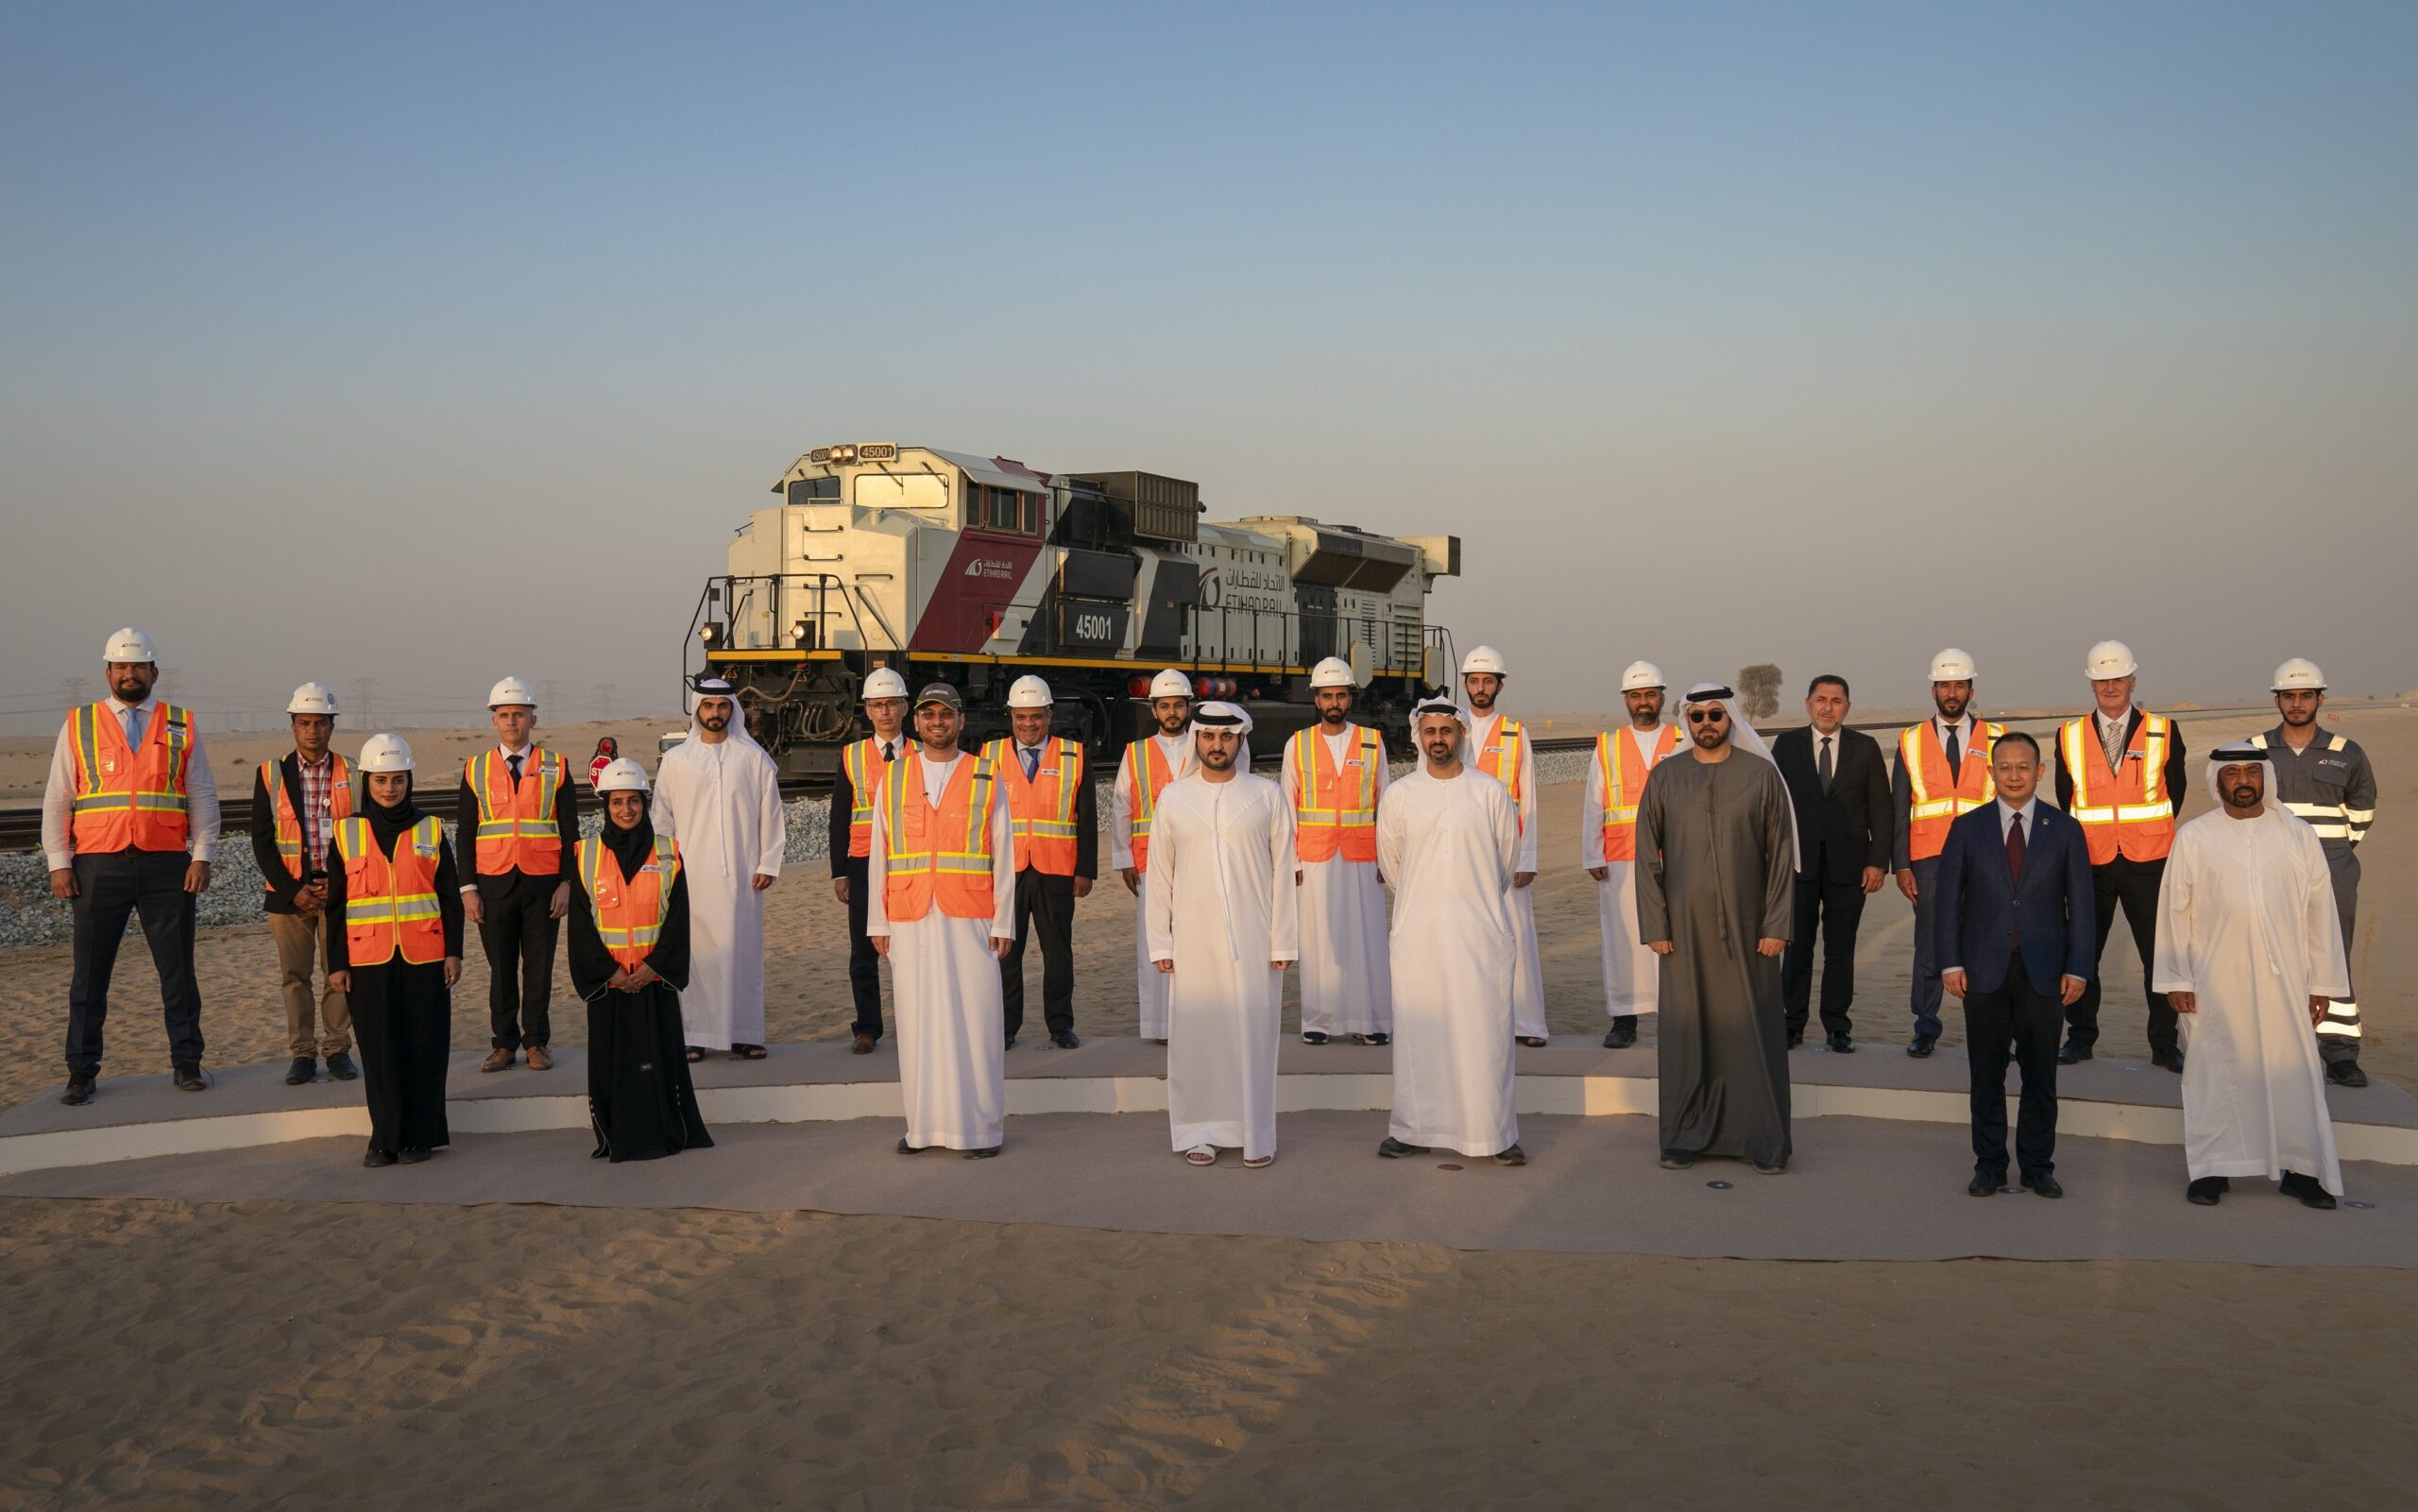 A ceremonious event: the final piece of track is laid on the railway line connecting Abu Dhabi and Dubai